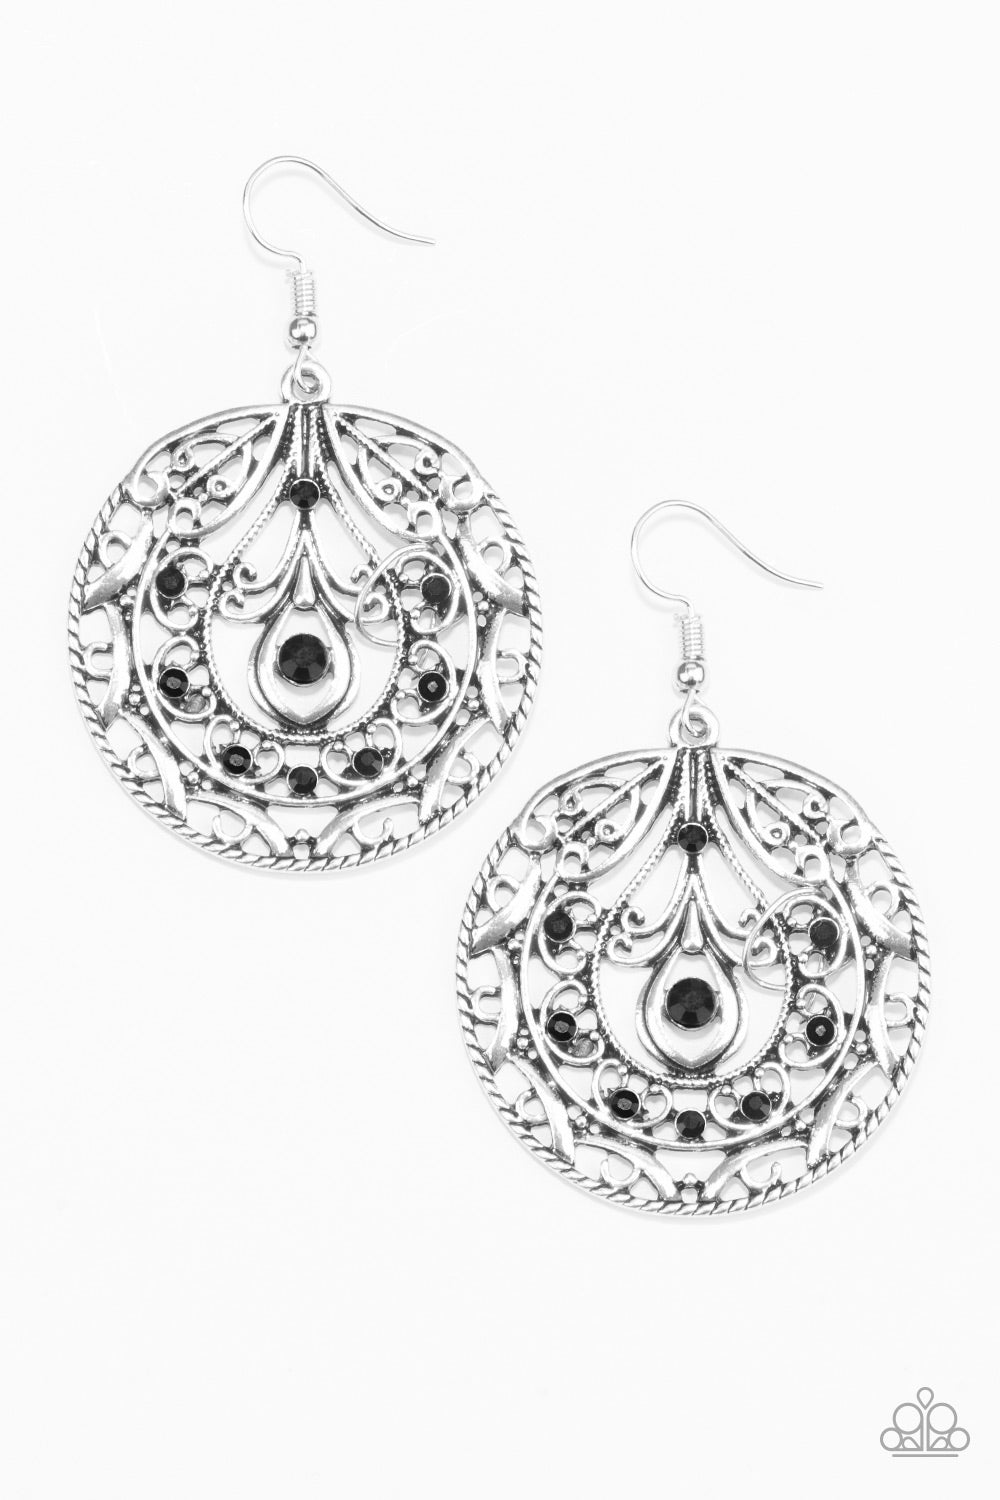 Choose To Sparkle - Black Item #E444 Sparkling black rhinestones are sprinkled along a swirling silver backdrop radiating with whimsical filigree. Earring attaches to a standard fishhook fitting. All Paparazzi Accessories are lead free and nickel free!  Sold as one pair of earrings.